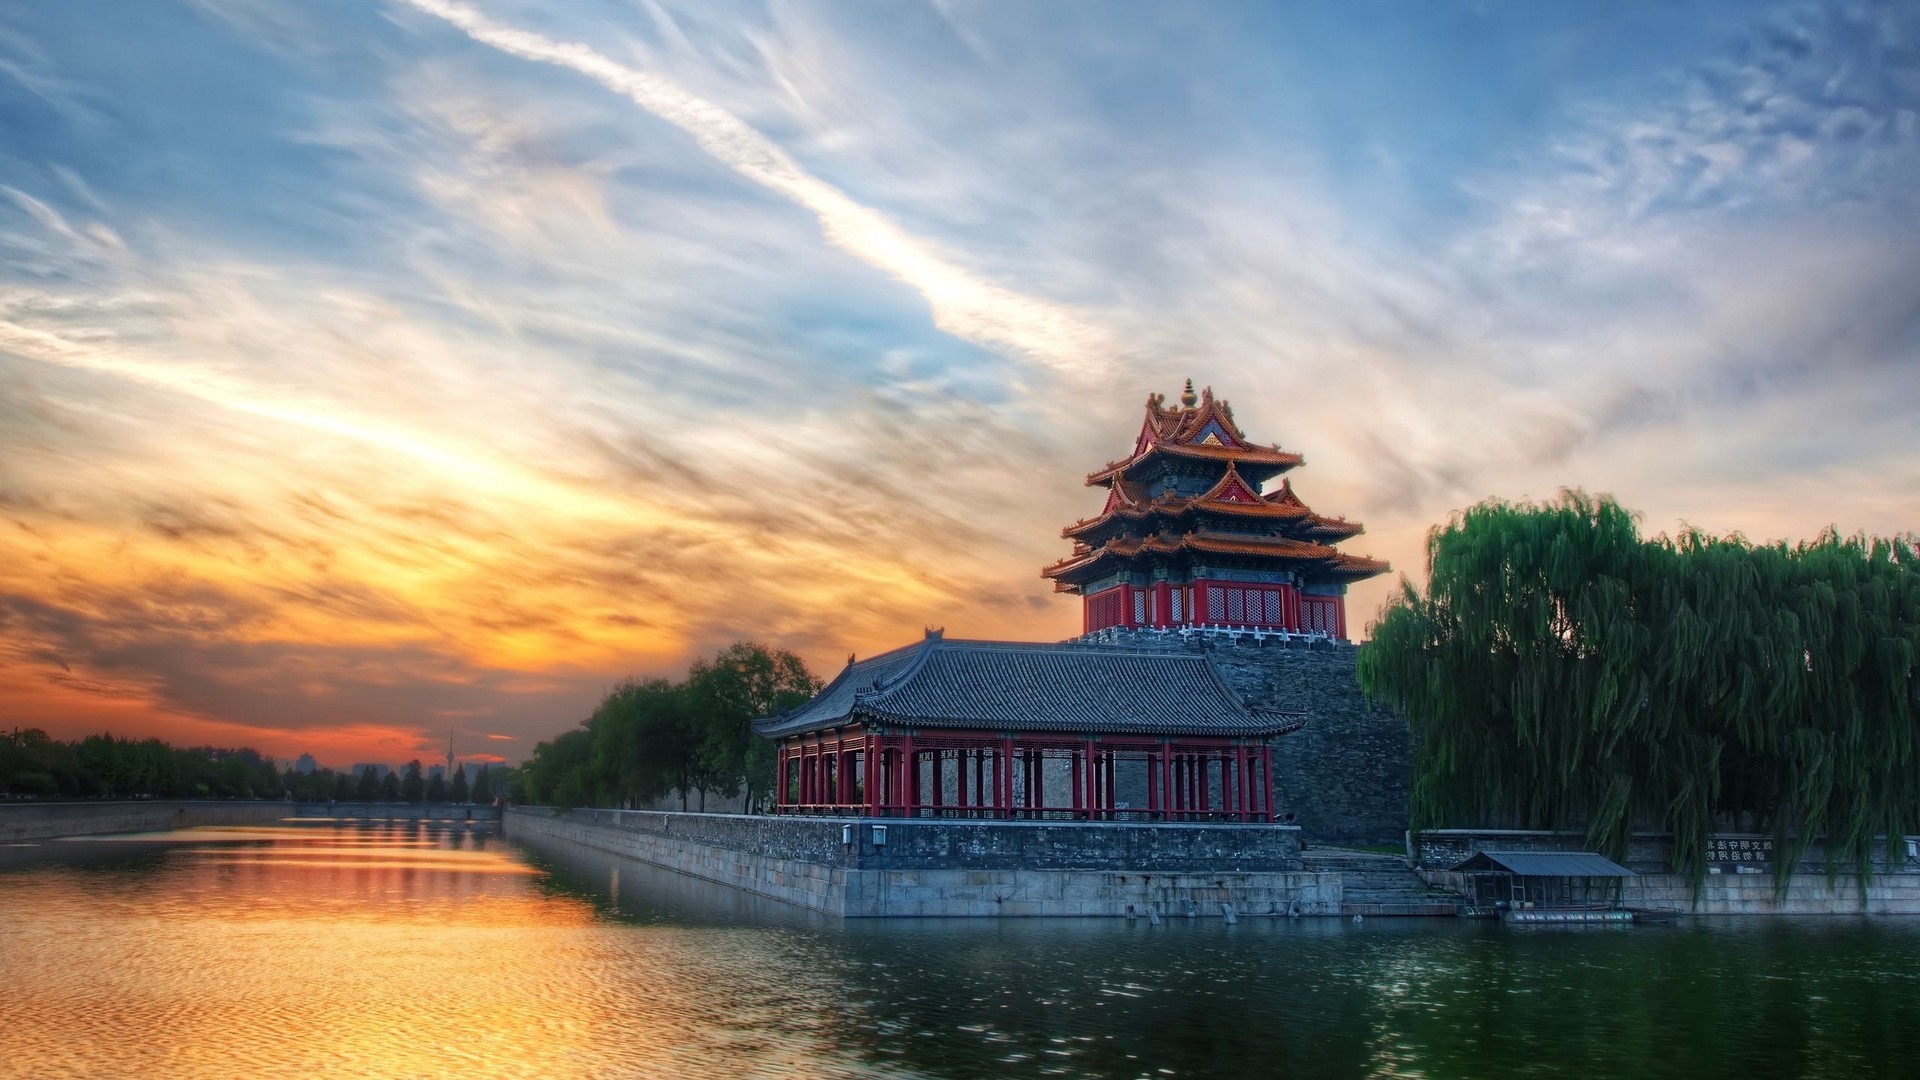 1920x1080 wallpapers: beijing, china, structure, sky, arbor, trees (image)